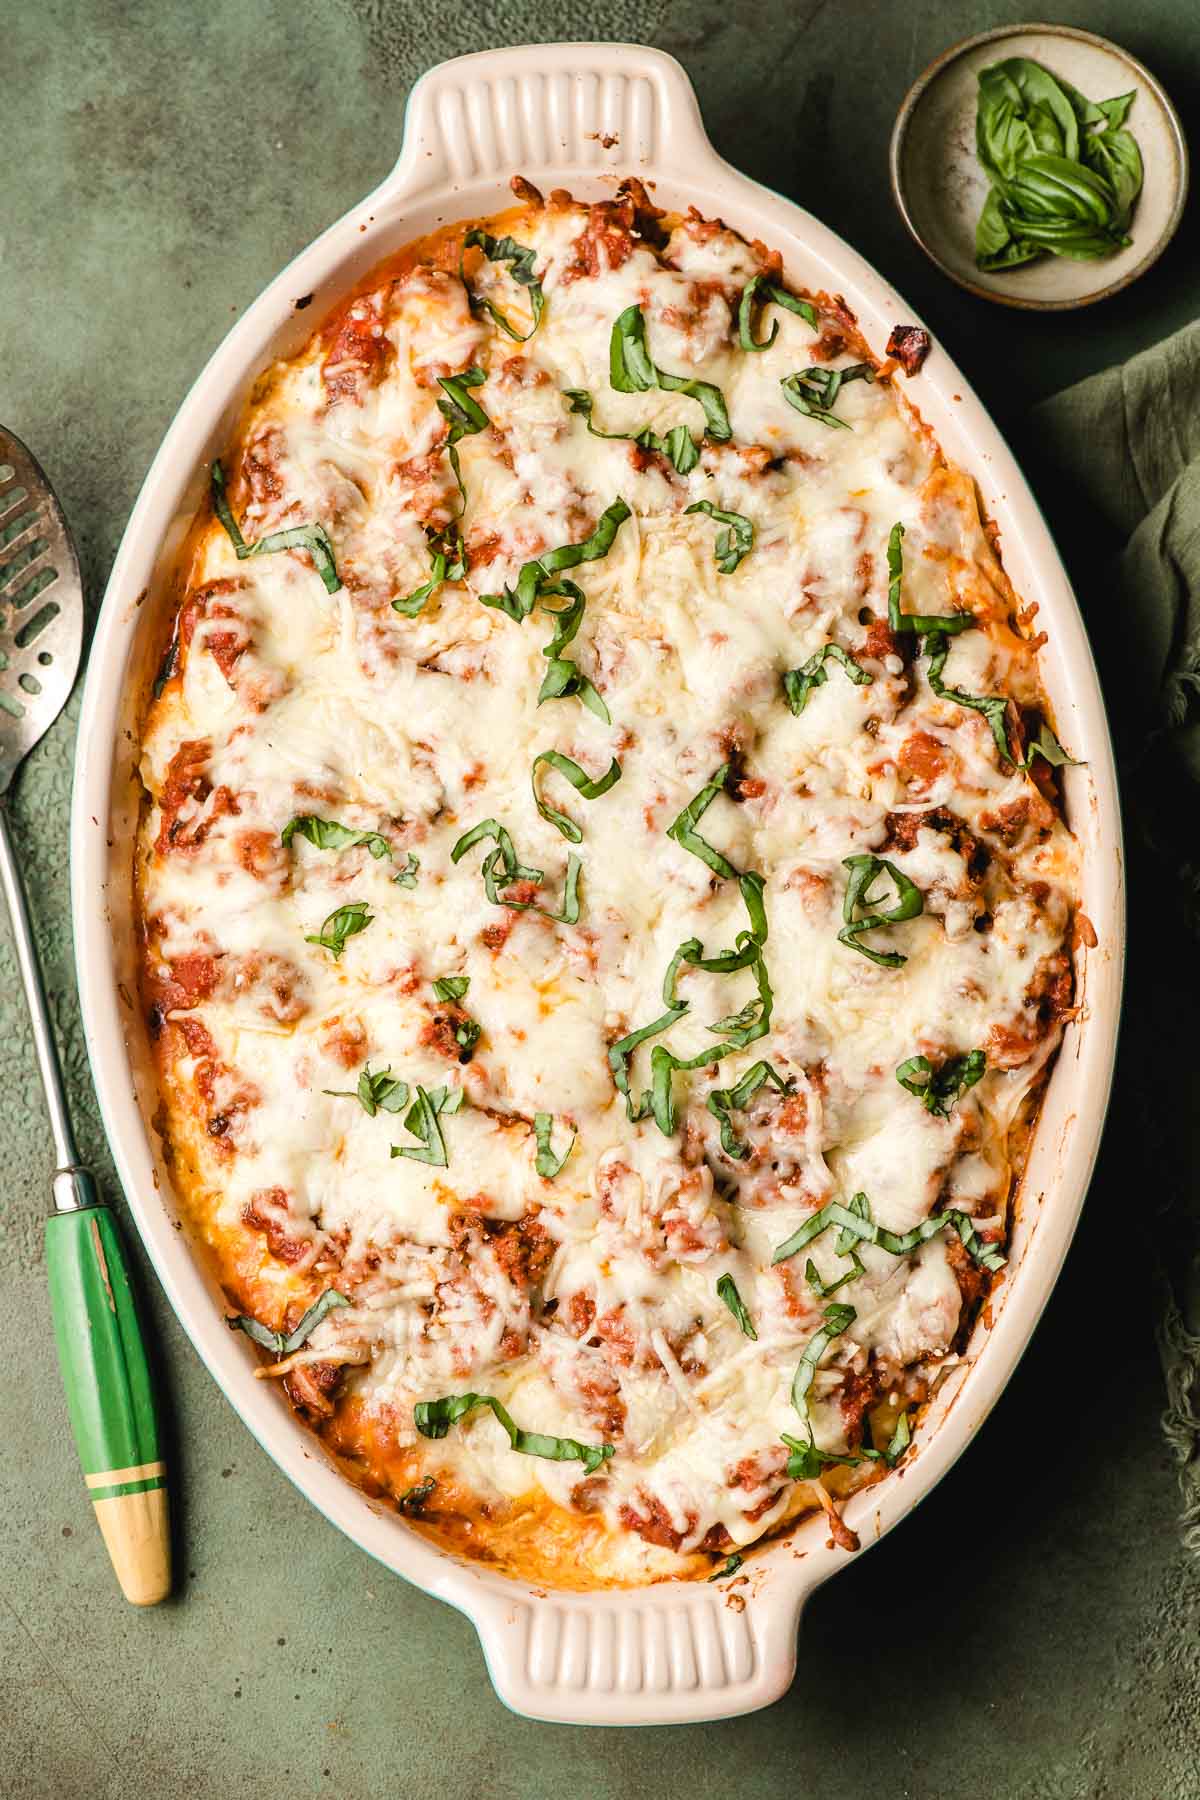 A serving dish full of Stuffed Shells with Ground Beef topped with cheese and basil.